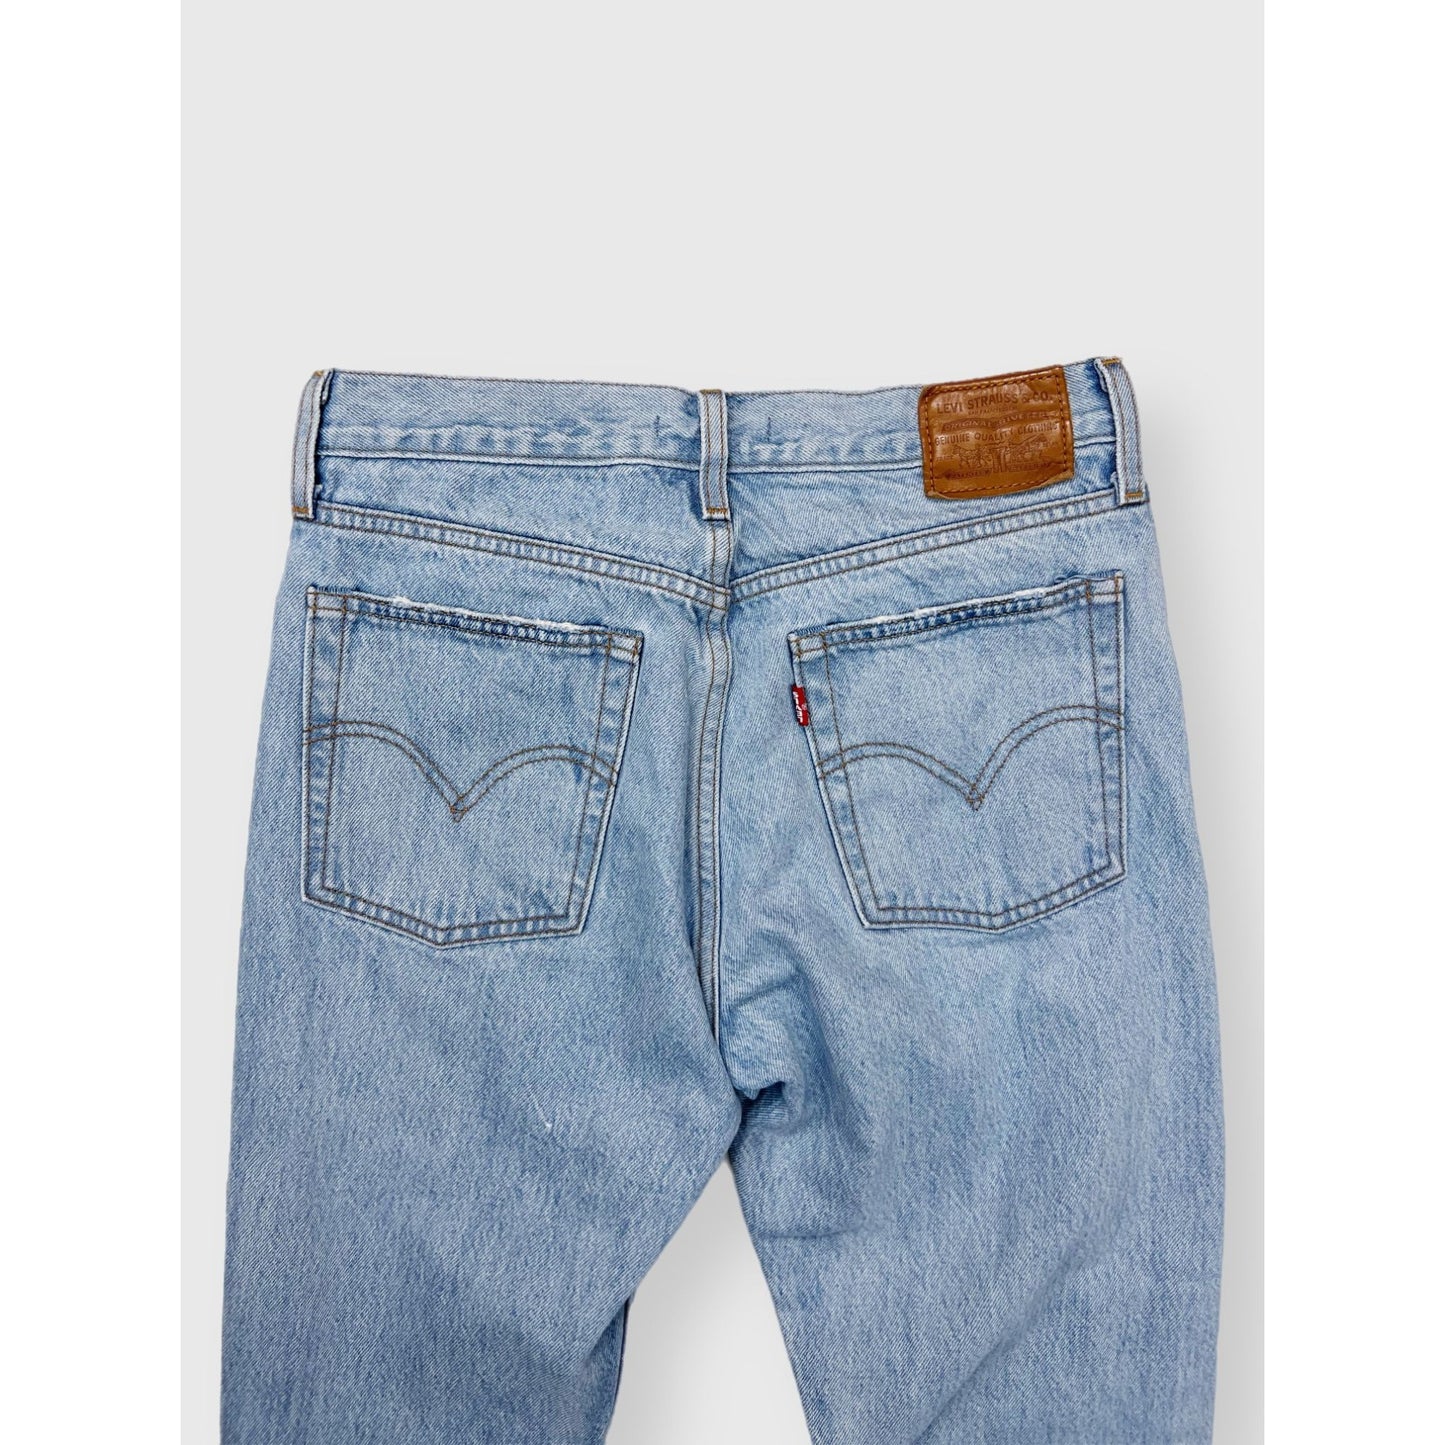 Levi’s Button Fly Wedgie Jeans - 27